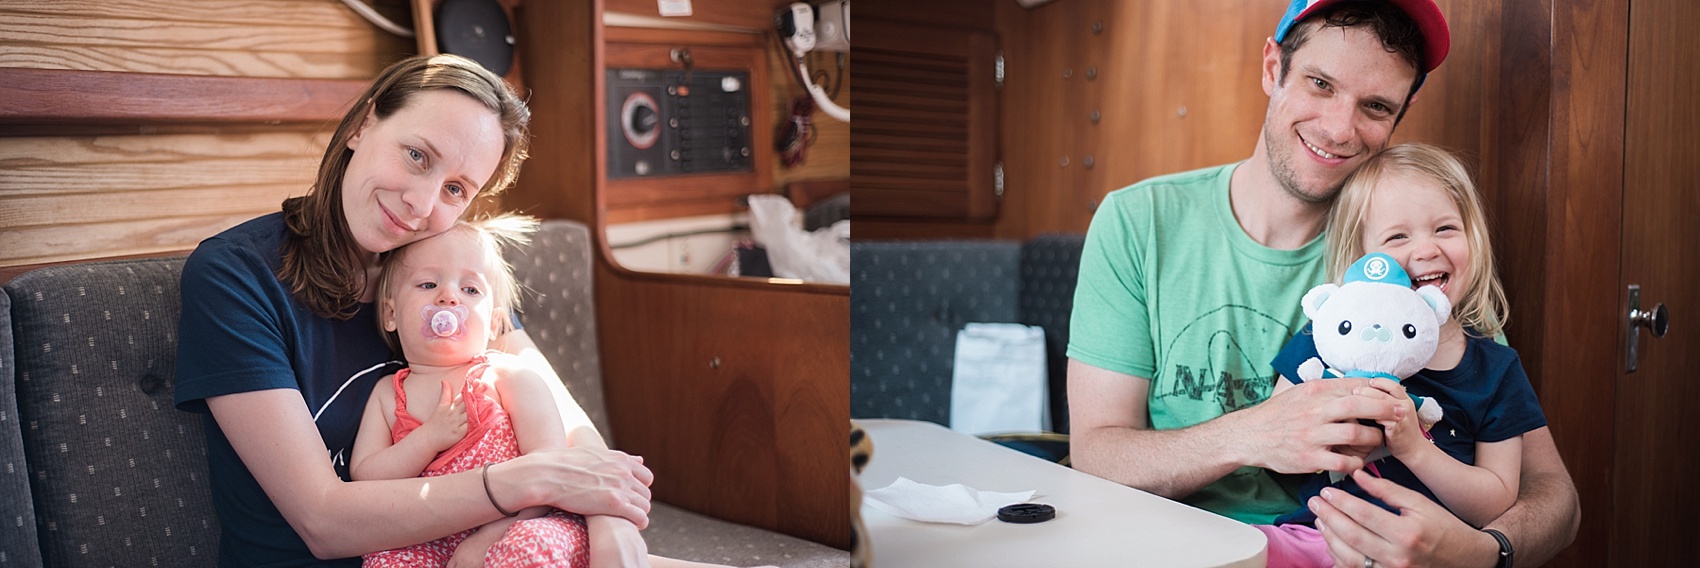 Michigan wedding and lifestyle photographer, Allie Siarto, shares a photo of her young family in the cabin of a Catalina 30 sailboat